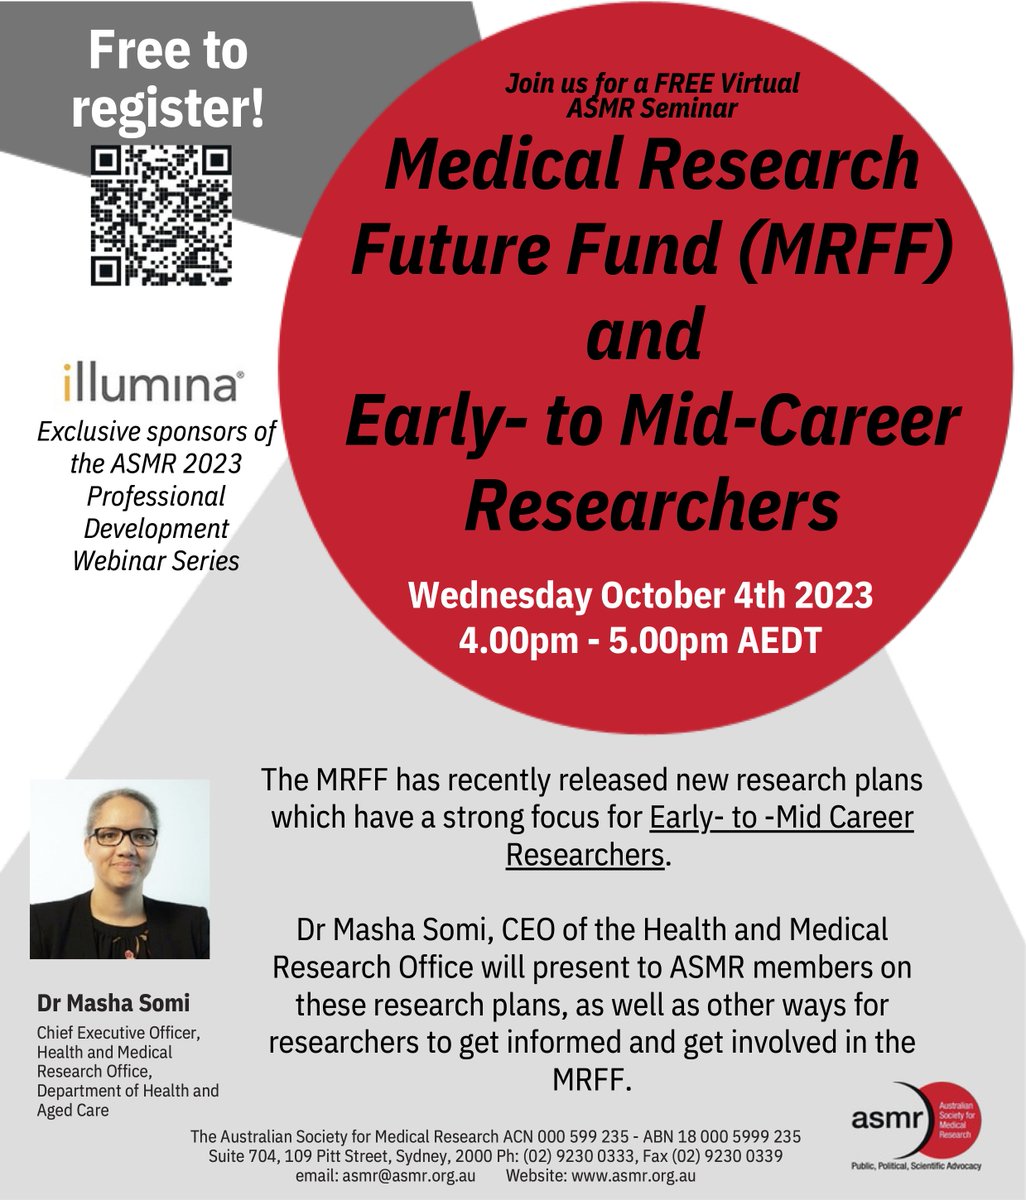 Don't forget to register for our free webinar where we will welcome Dr Masha Somi, CEO of the Health and Medical Research Office @healthgovau, to discuss how the new MRFF research plans will impact Early and Mid Career Researchers. When⏱: Wed Oct 4 4 pm AEDT | 3 pm AEST